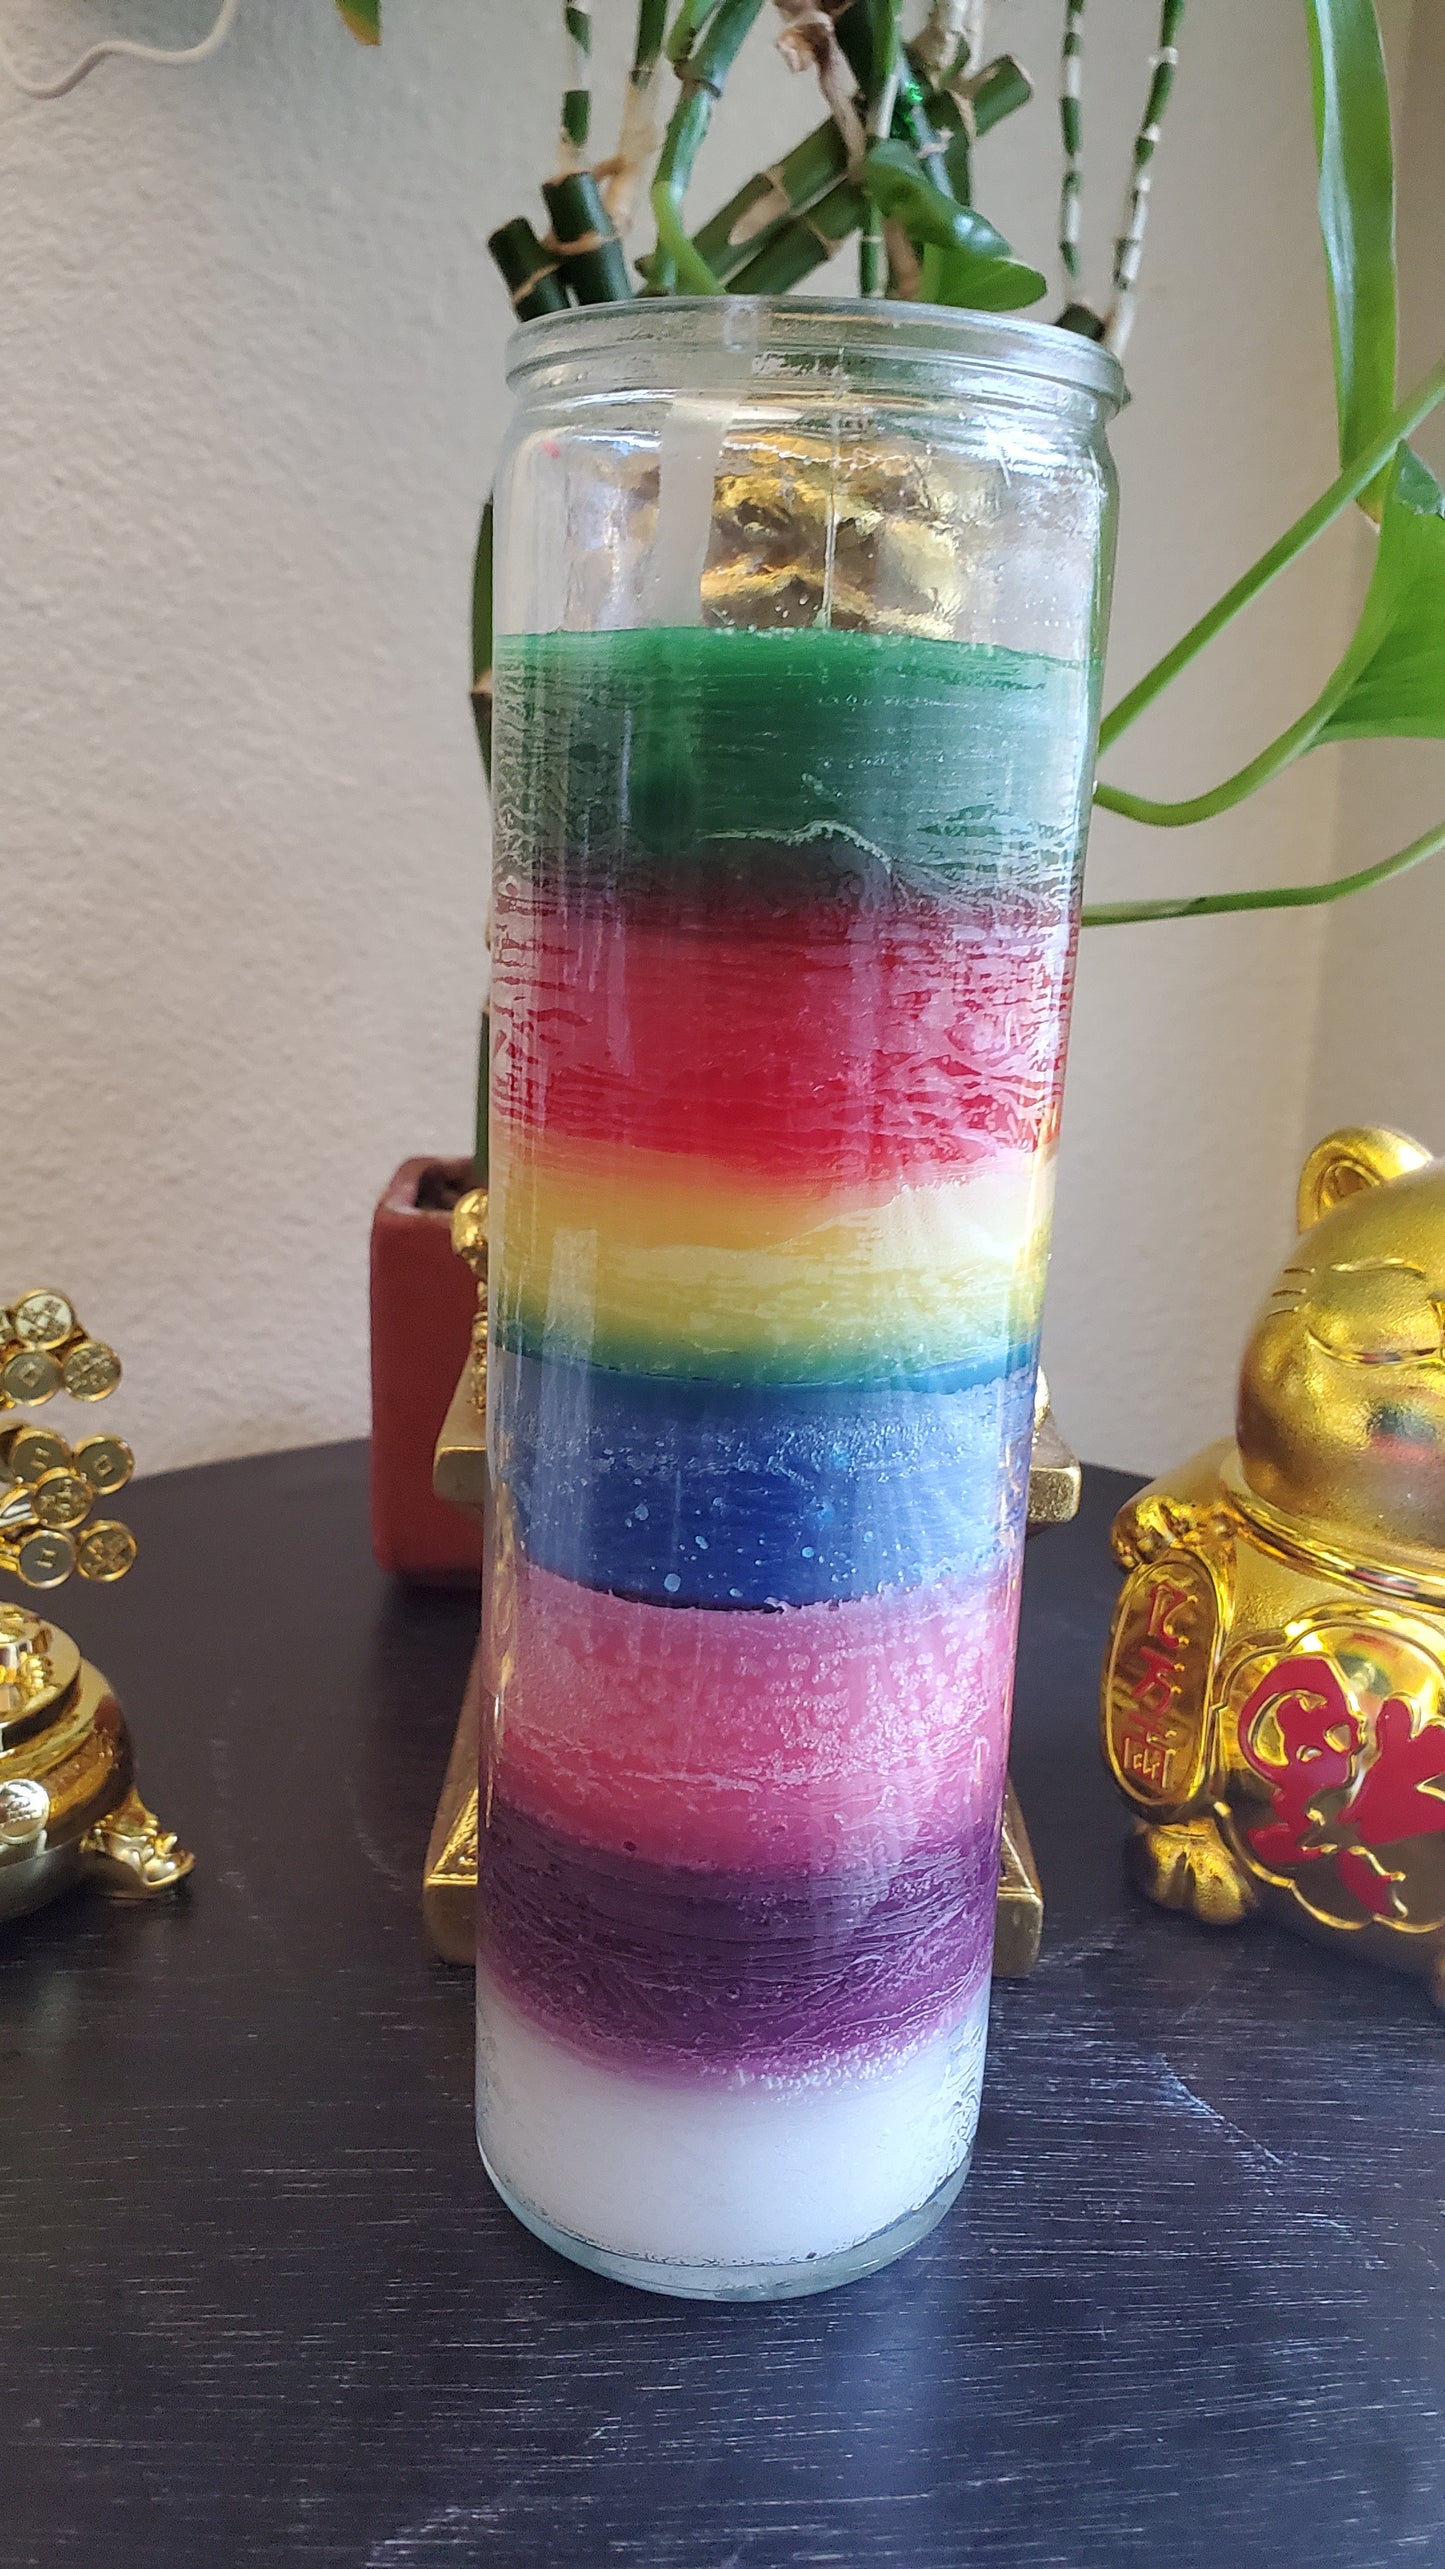 Chakra Healing Multi-Color 7-Day Candle #Curio #ChakraHealing #Curio #CandleMagick #Cleansing